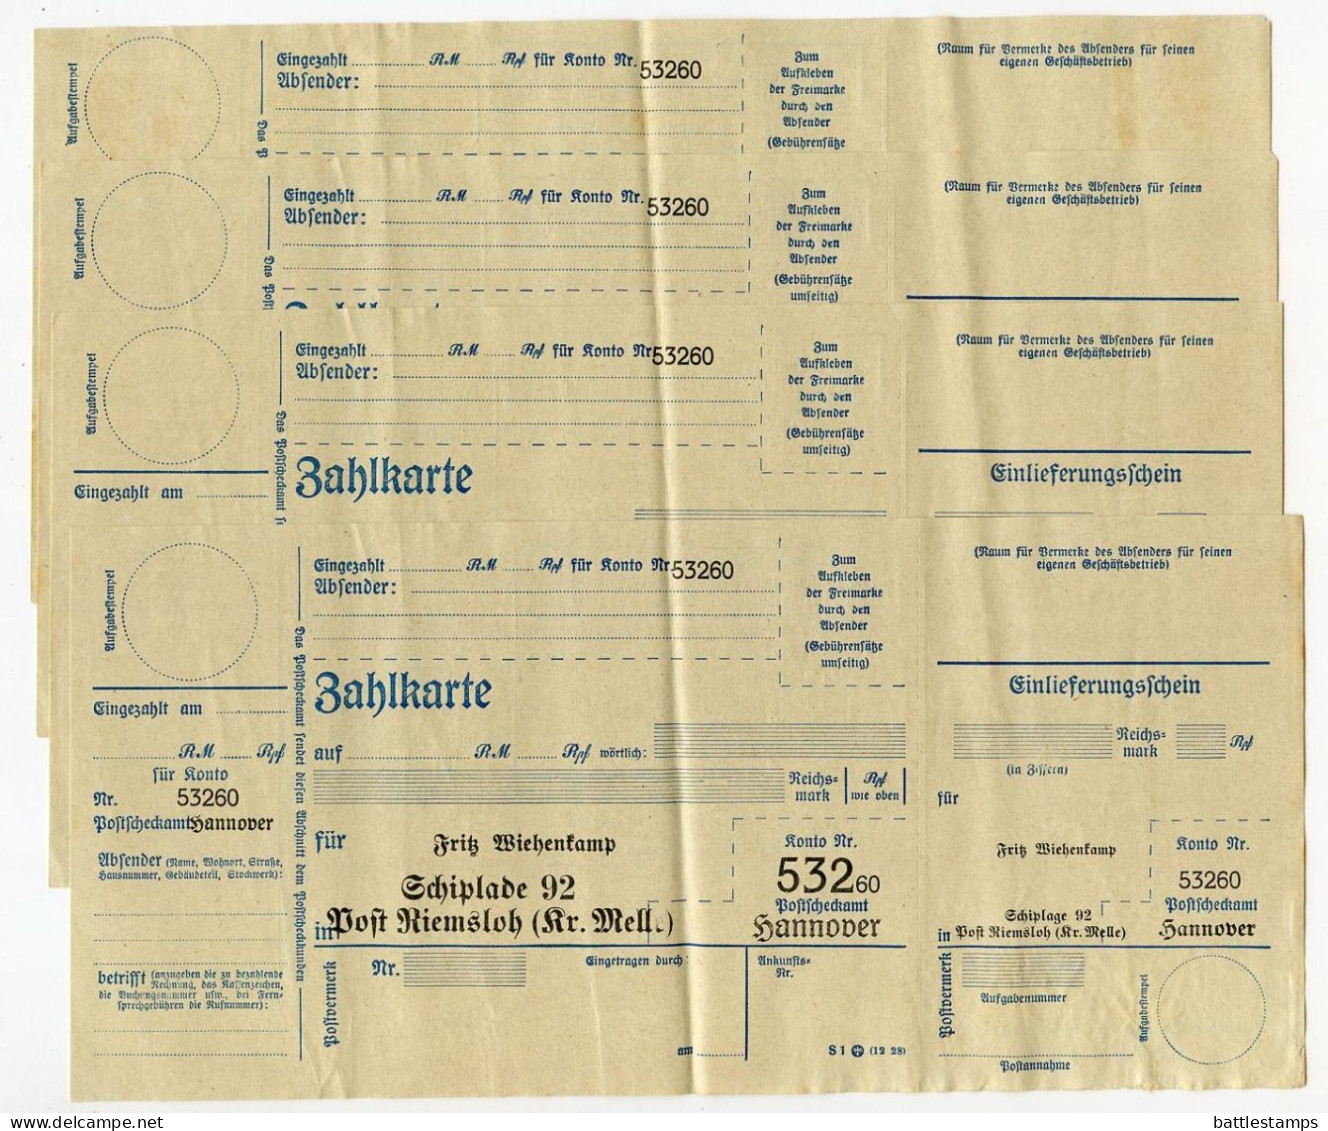 Germany 1931 Postscheckamt (Postal Check Office) Cover; Hannover to Schiplage; 18 Zahlkartes (Payment Cards)